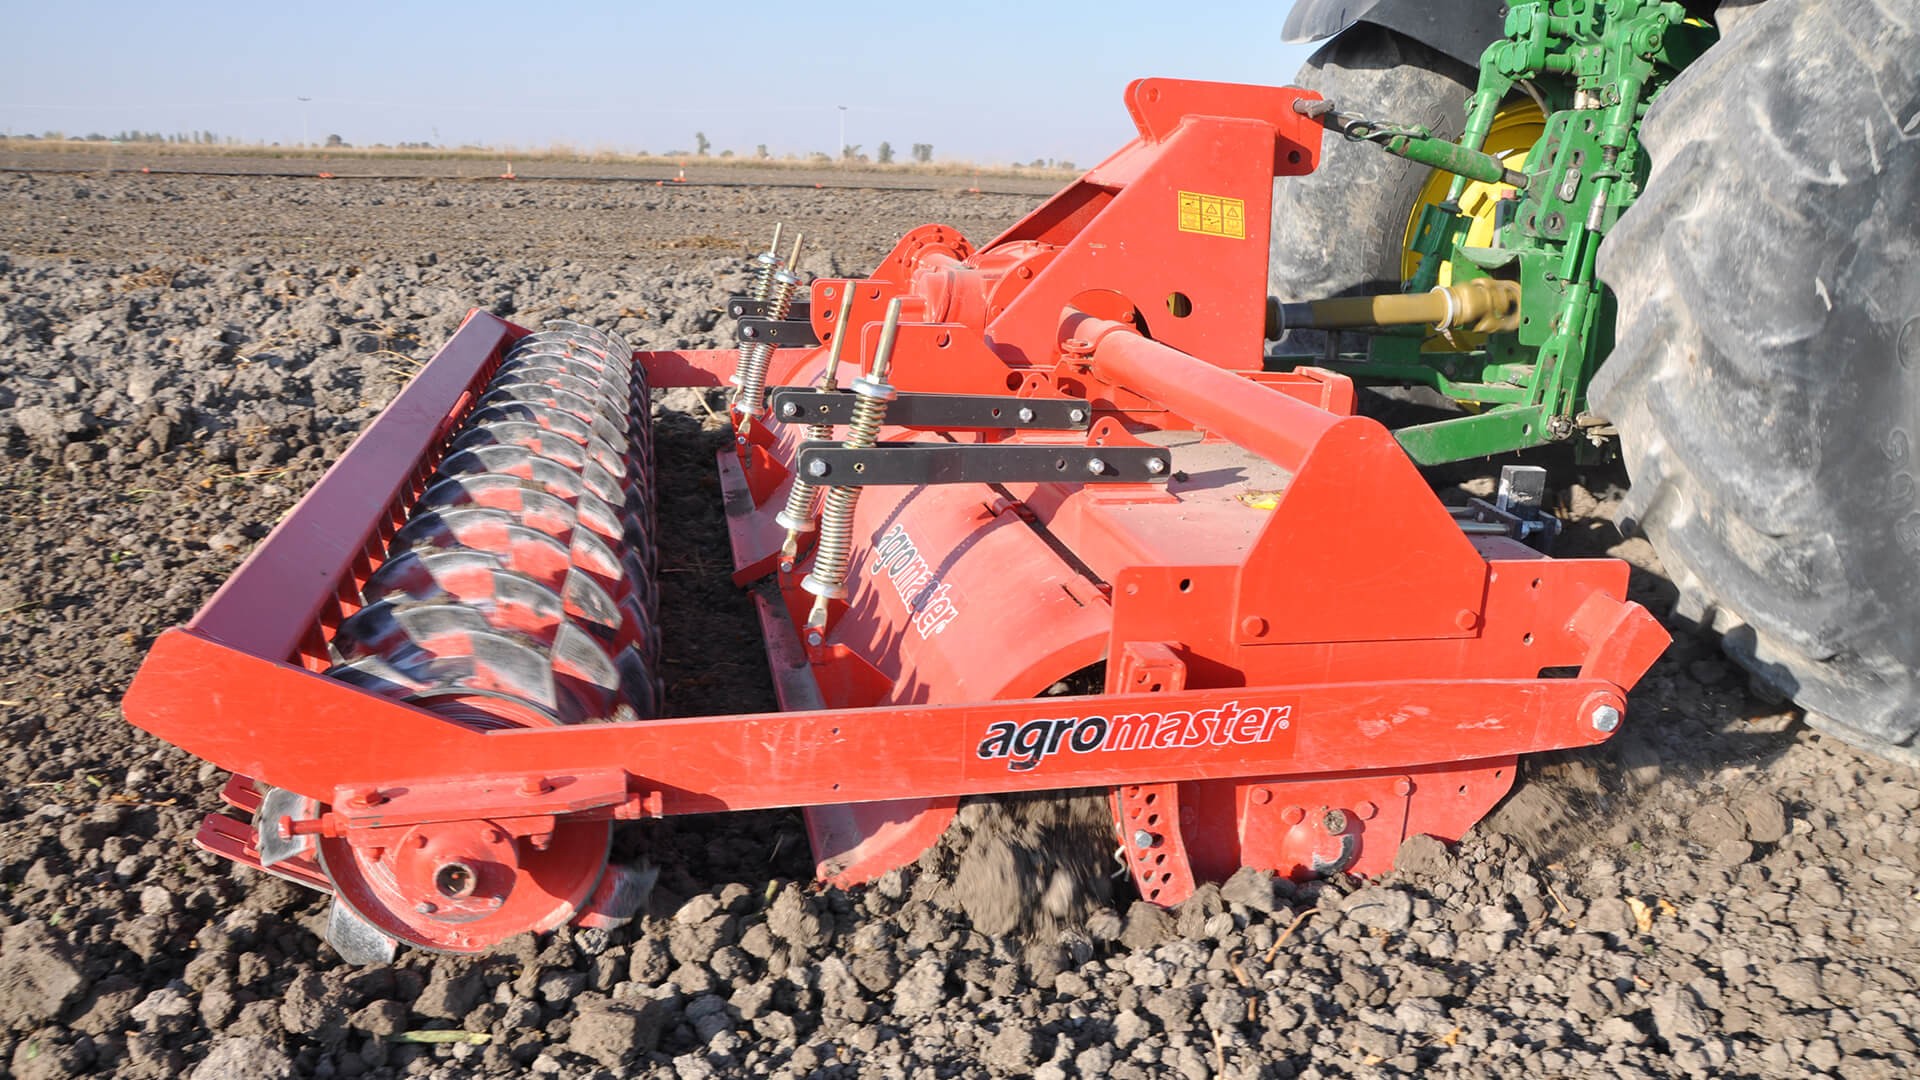 Where to find the best deals on new or used rotary tillers?